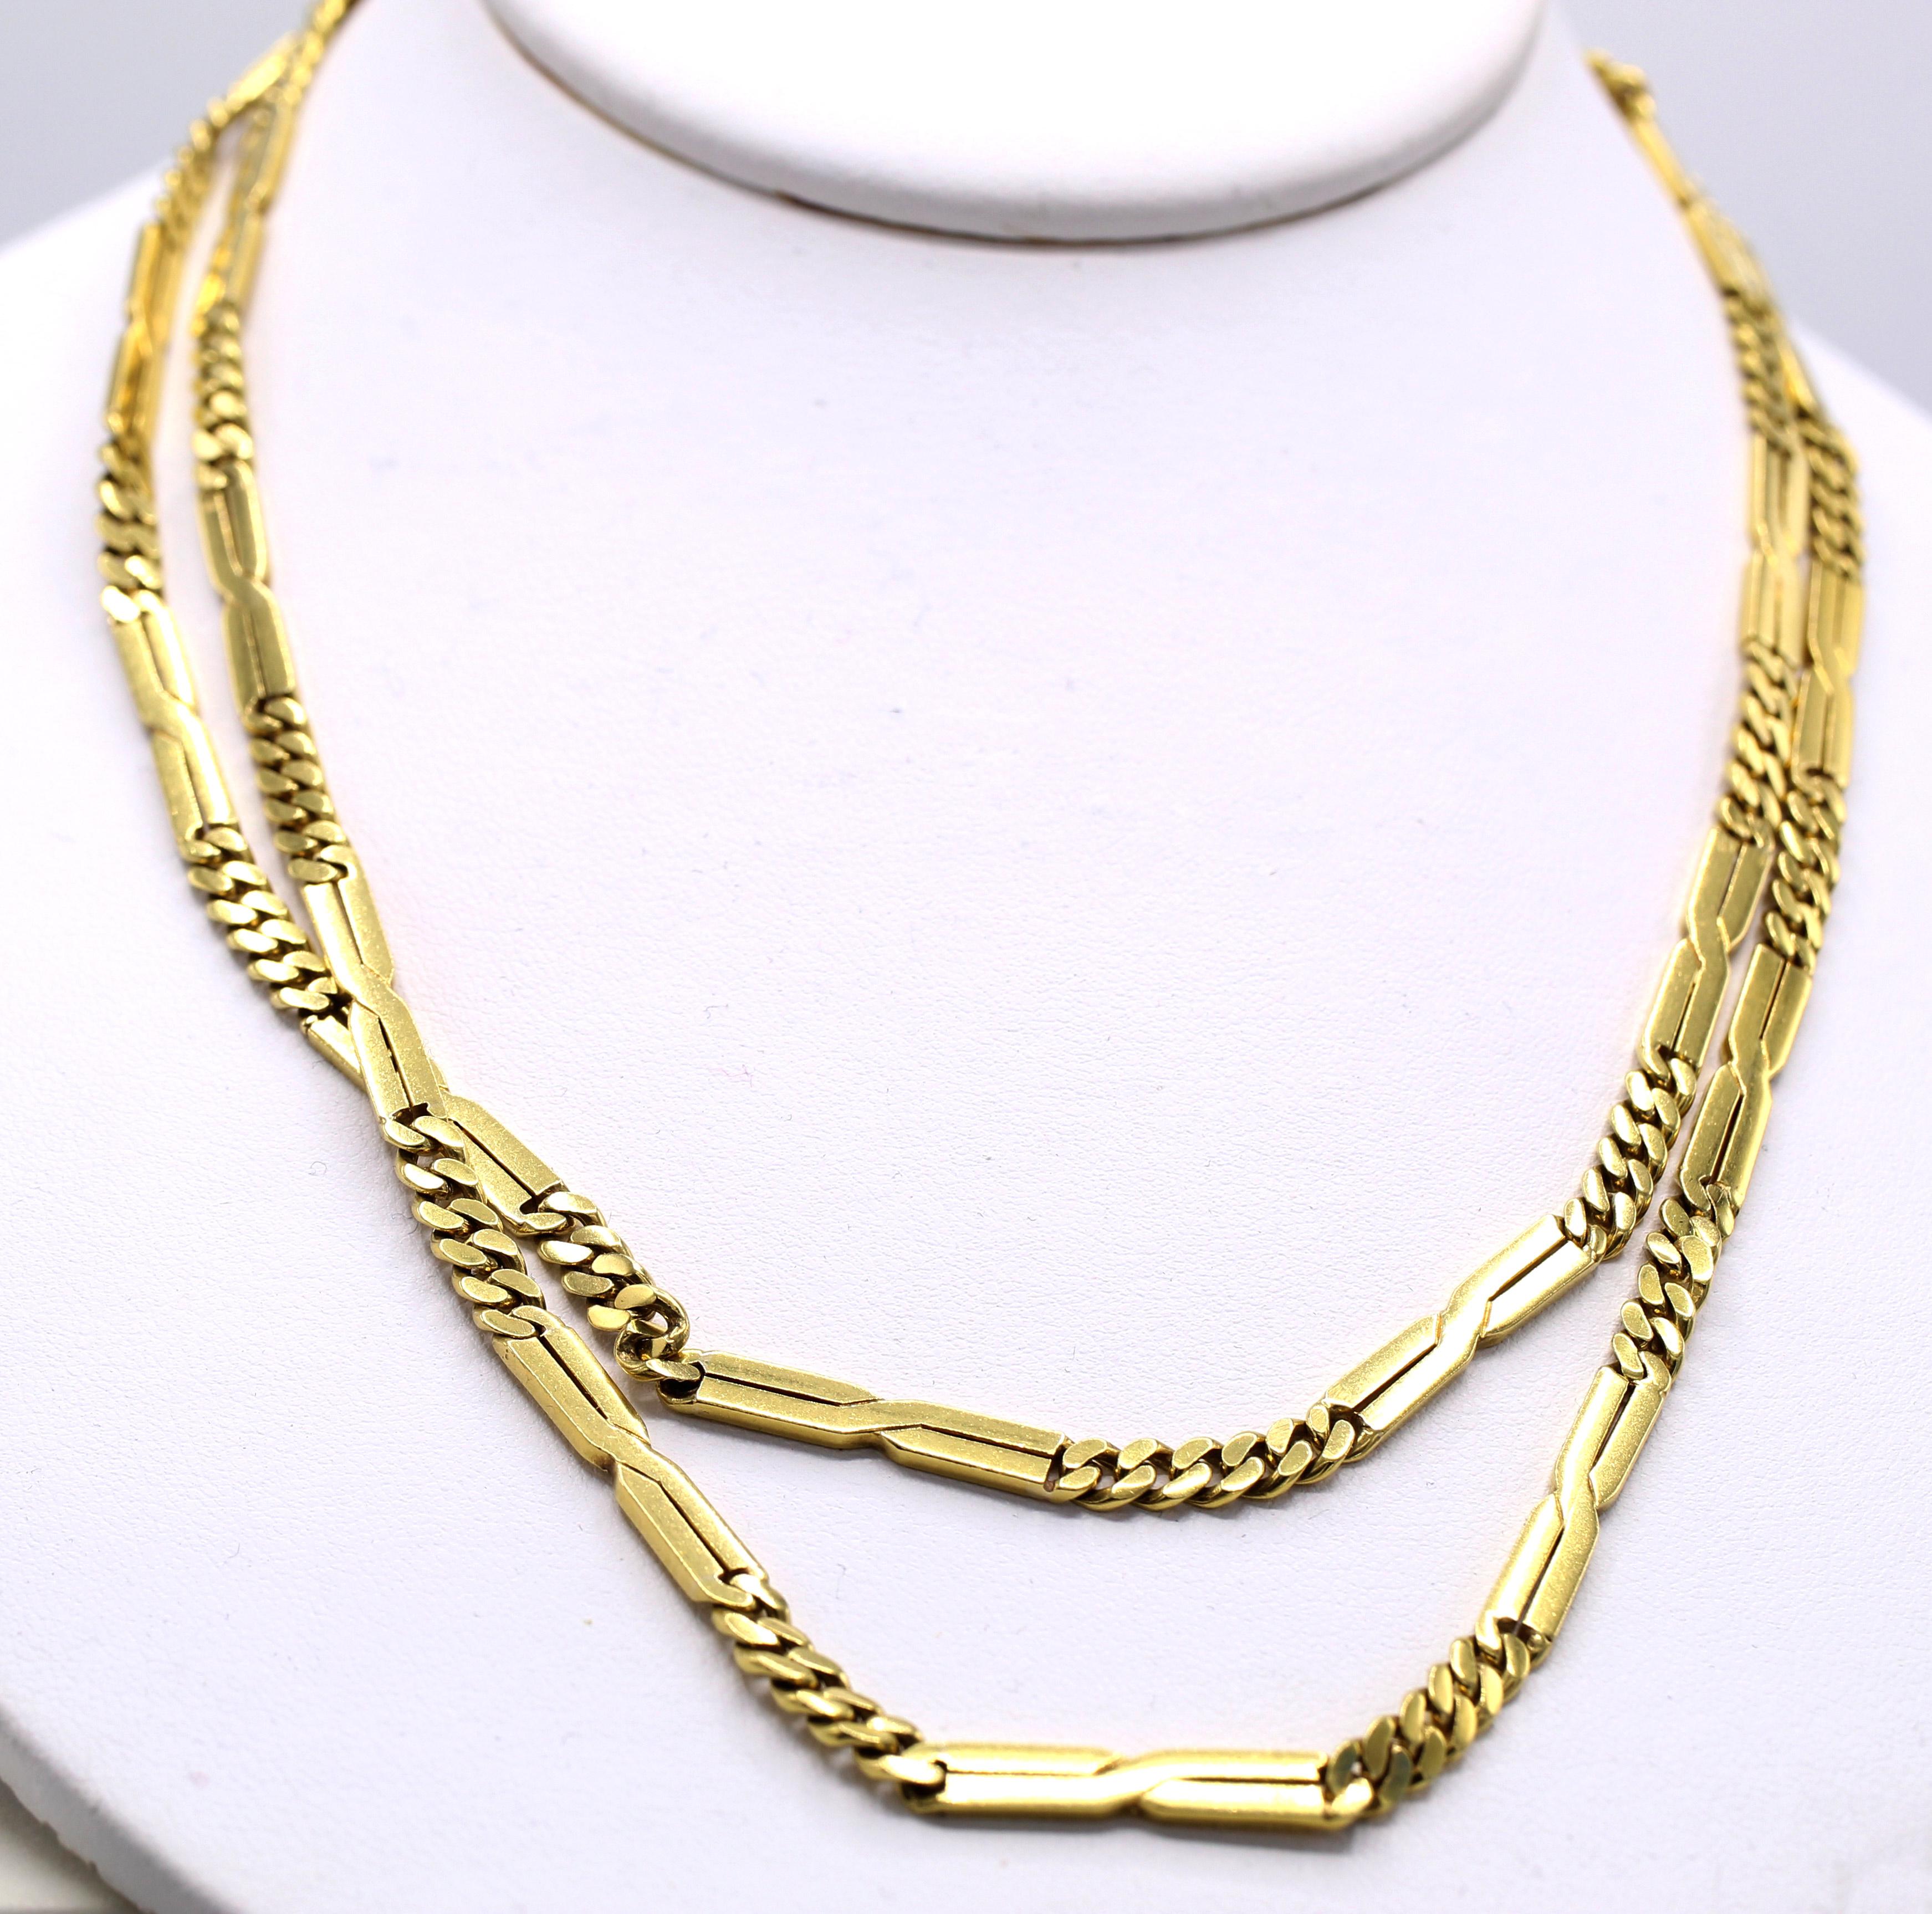 Chic 1980s Cartier 18 karat yellow gold long chain necklace, can be casually worn at full length of 35 inches or doubled up as a choker. The flexible alternating curb link and flat bar link motifs give this necklace its cool and individualistic